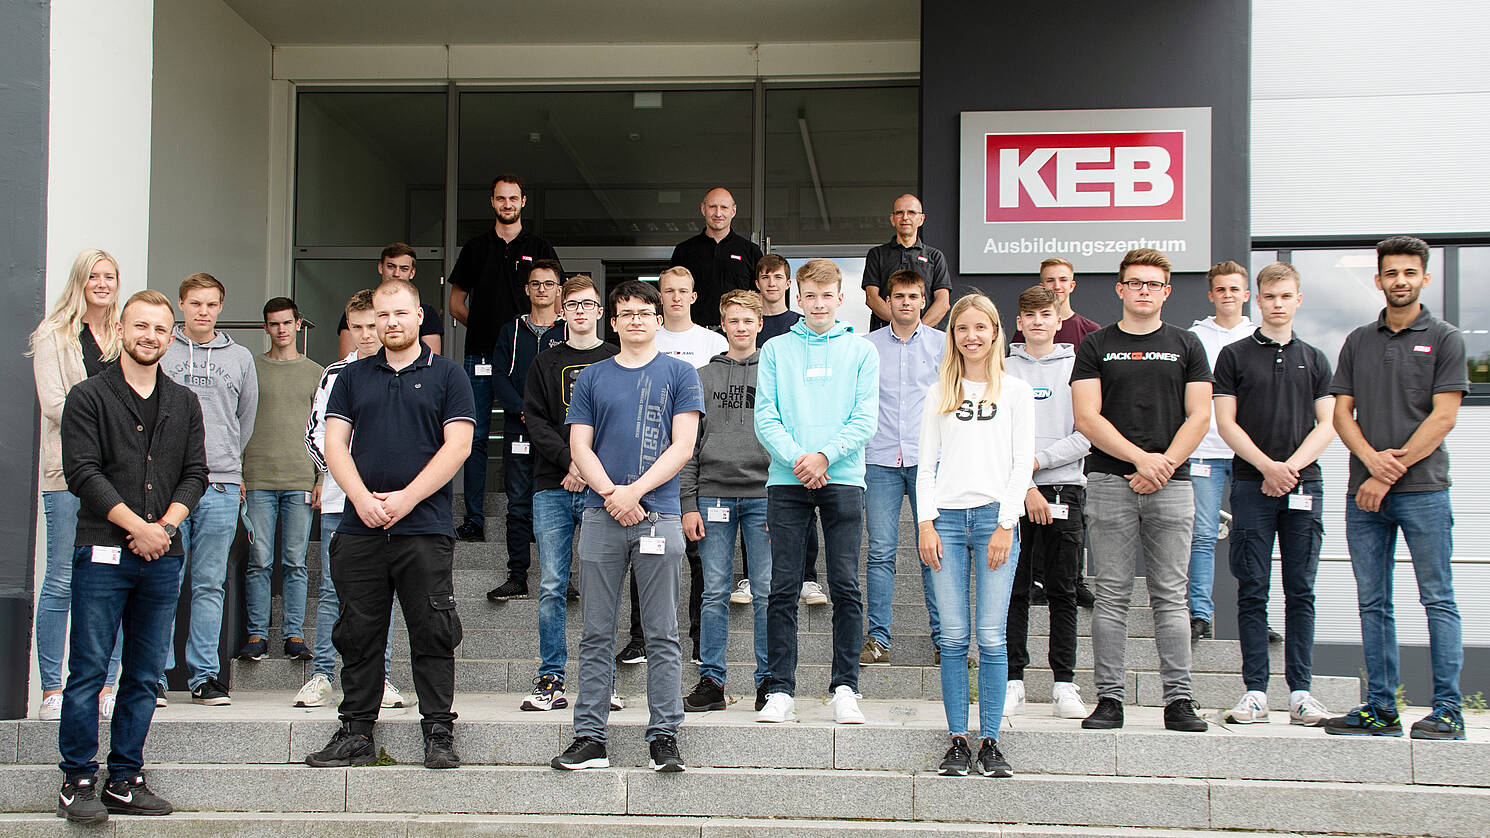 KEB welcomes 23 new apprentices and students in Barntrup